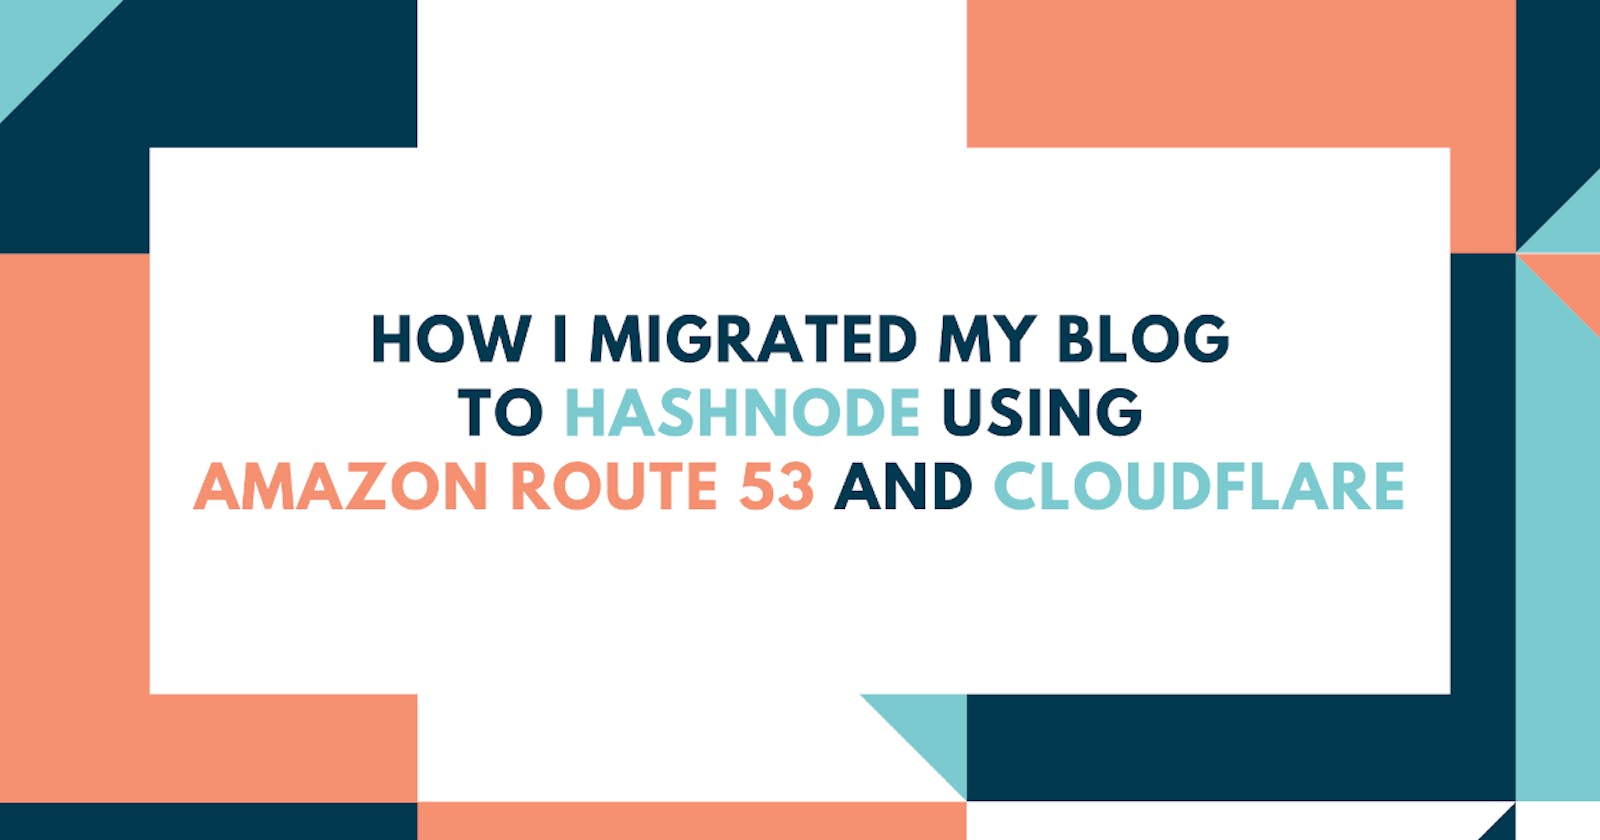 How I Migrated My Blog to Hashnode Using Amazon Route 53 and Cloudflare